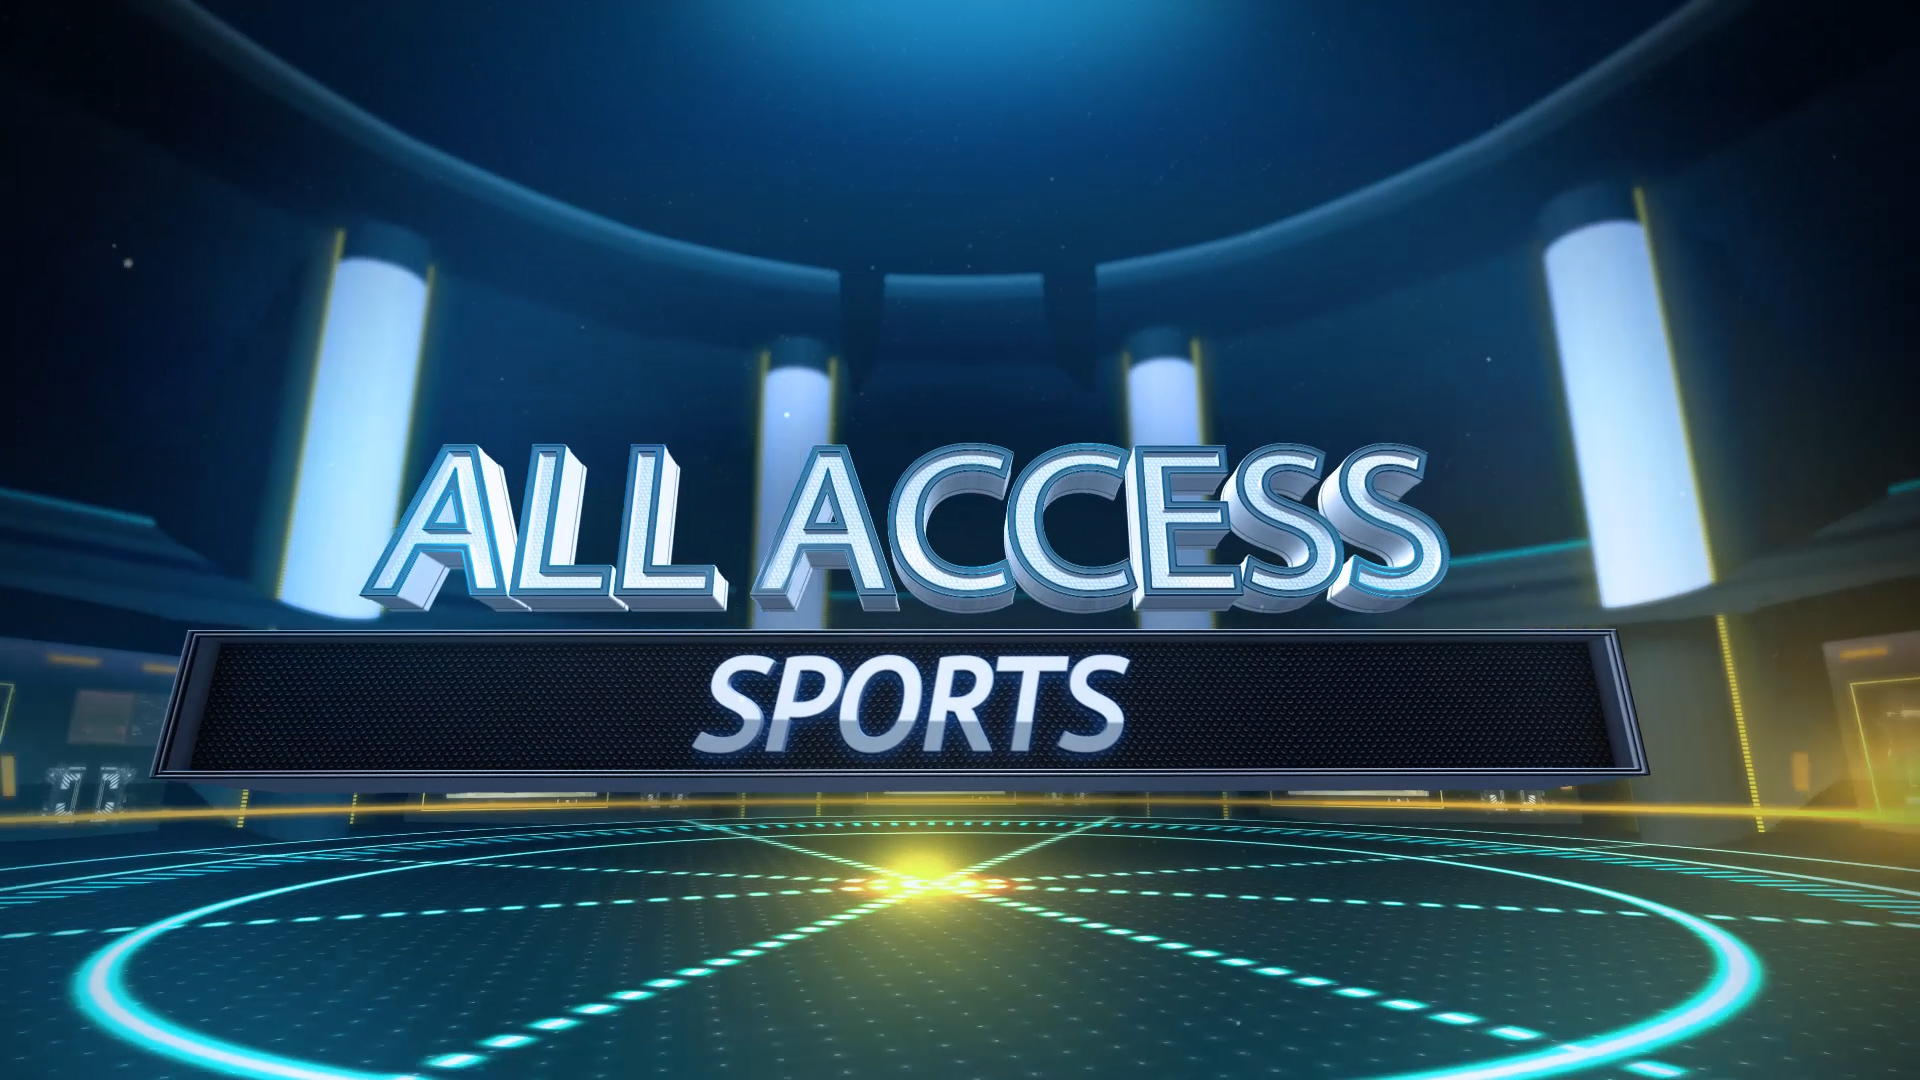 All Access Sports